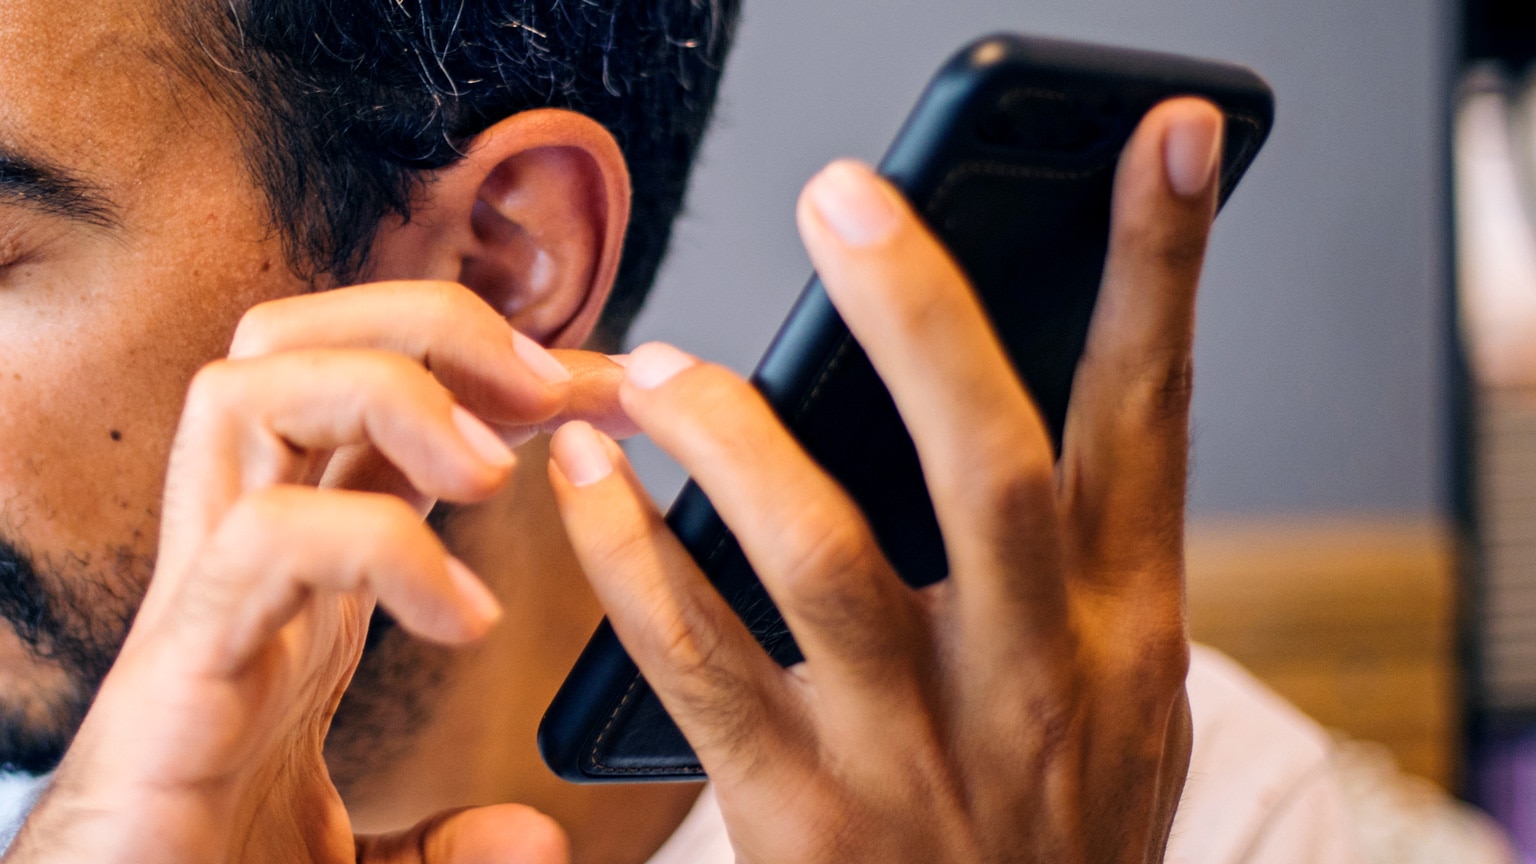 Close up photograph of both hands of a blind person who is holding a mobile phone up to his ear as he touches its screen.